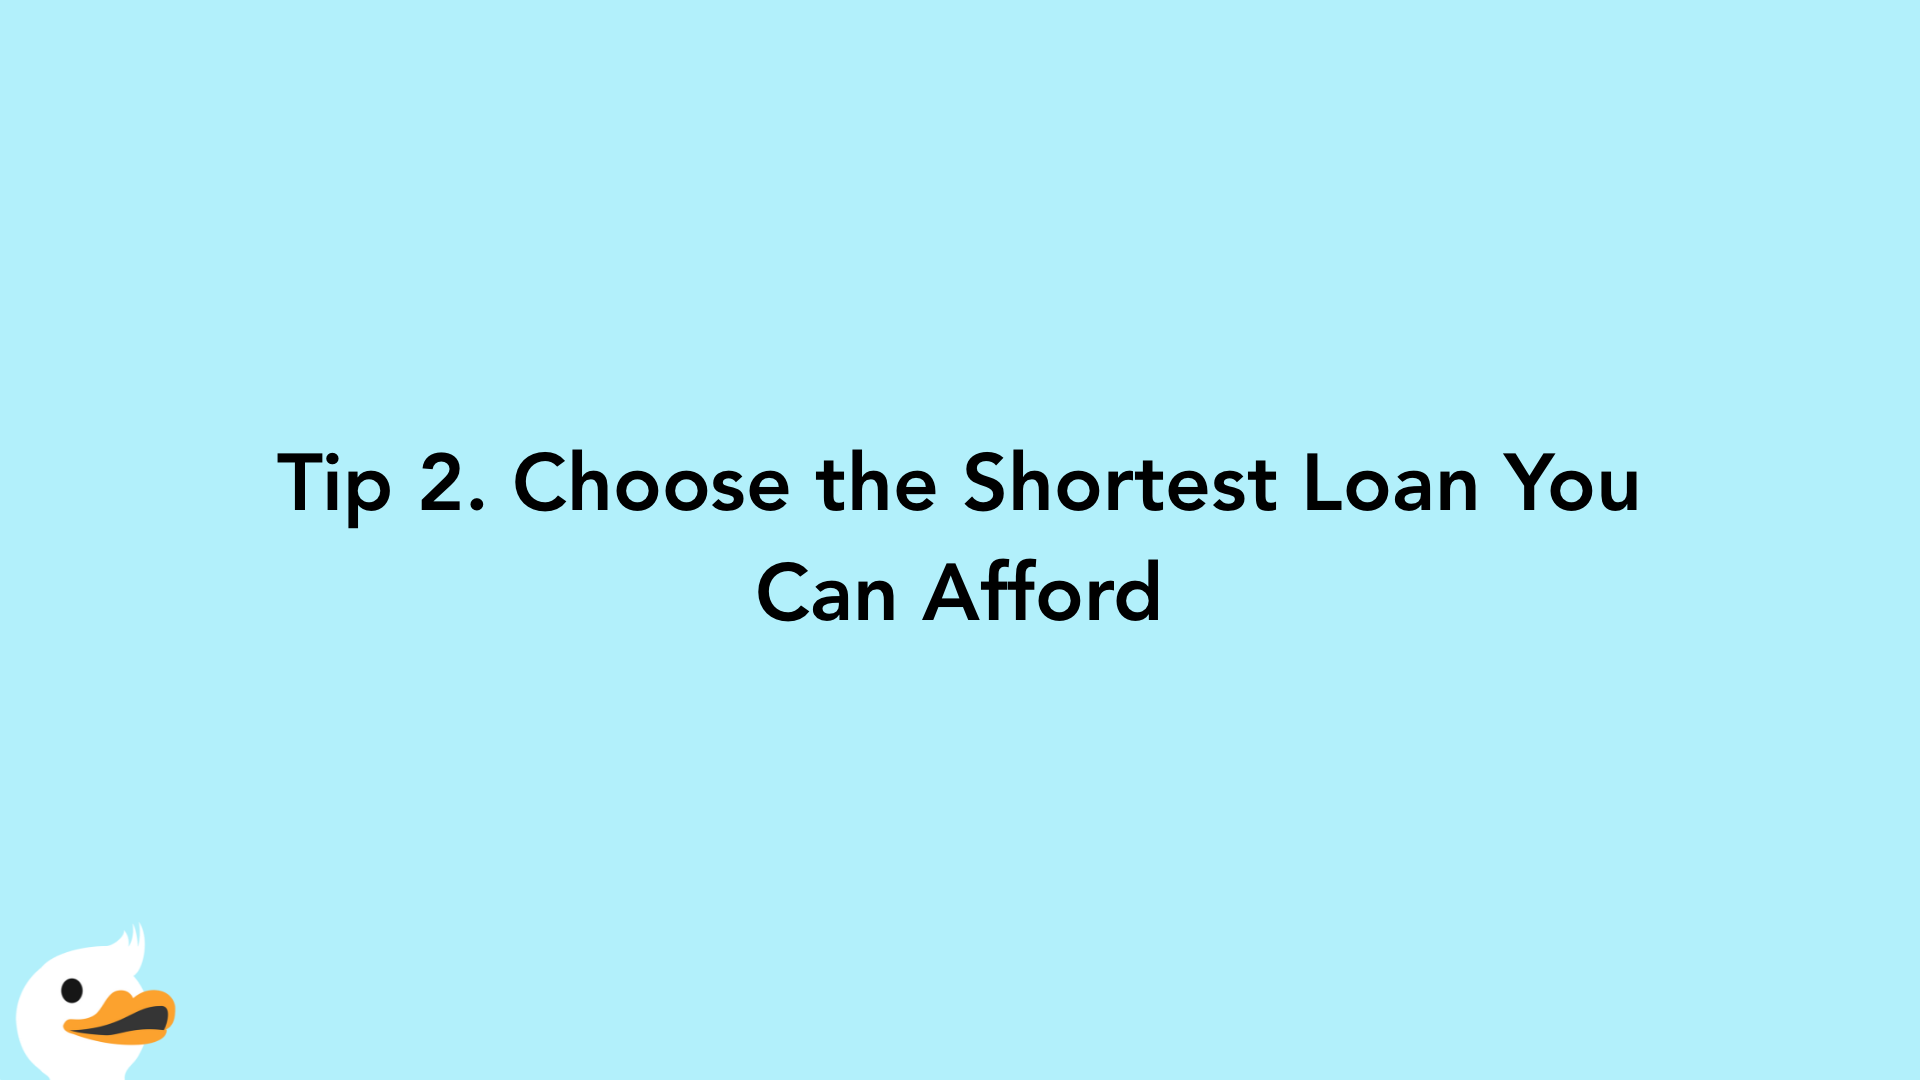 Tip 2. Choose the Shortest Loan You Can Afford